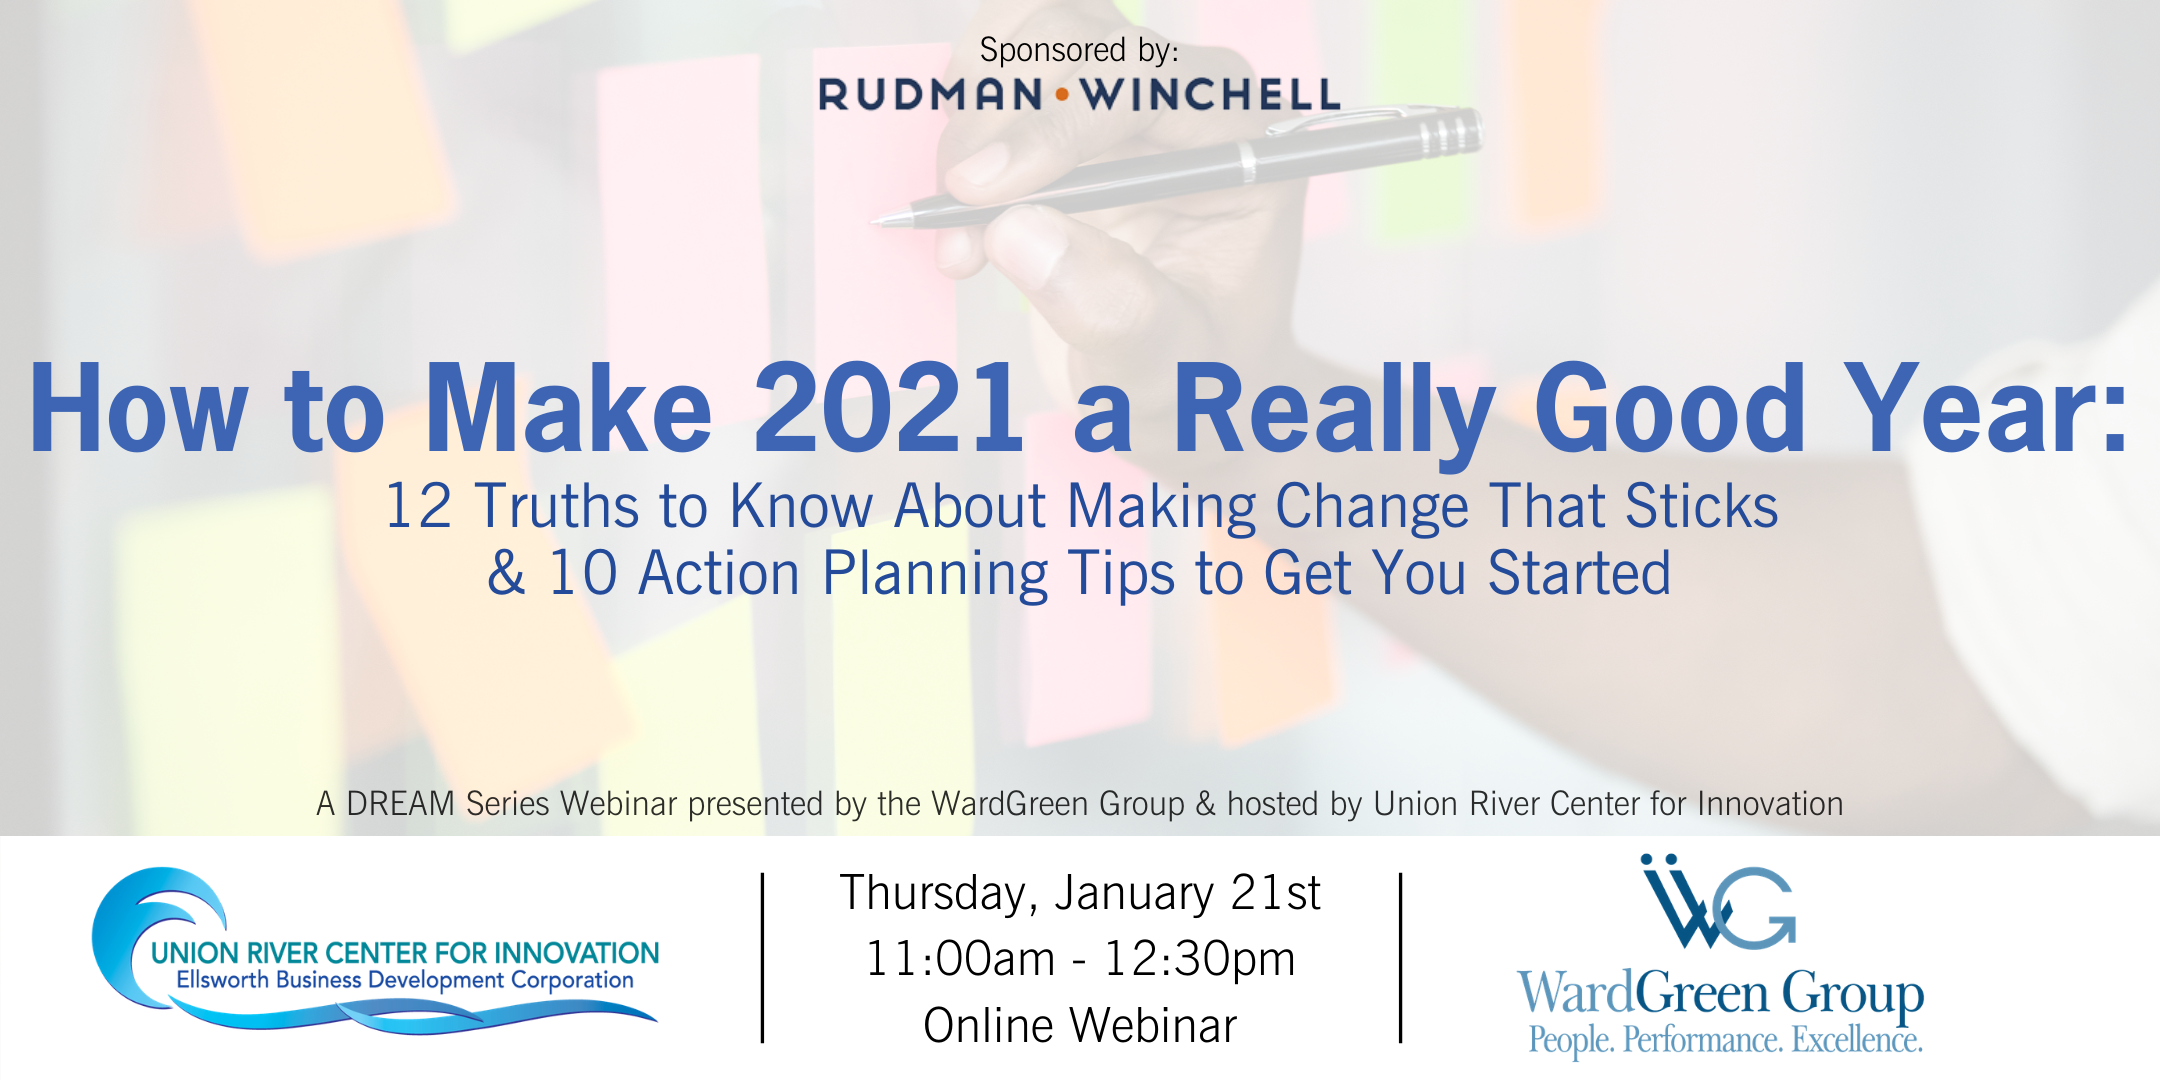 How to Make 2021 a Really Good Year | Union River Center for Innovation